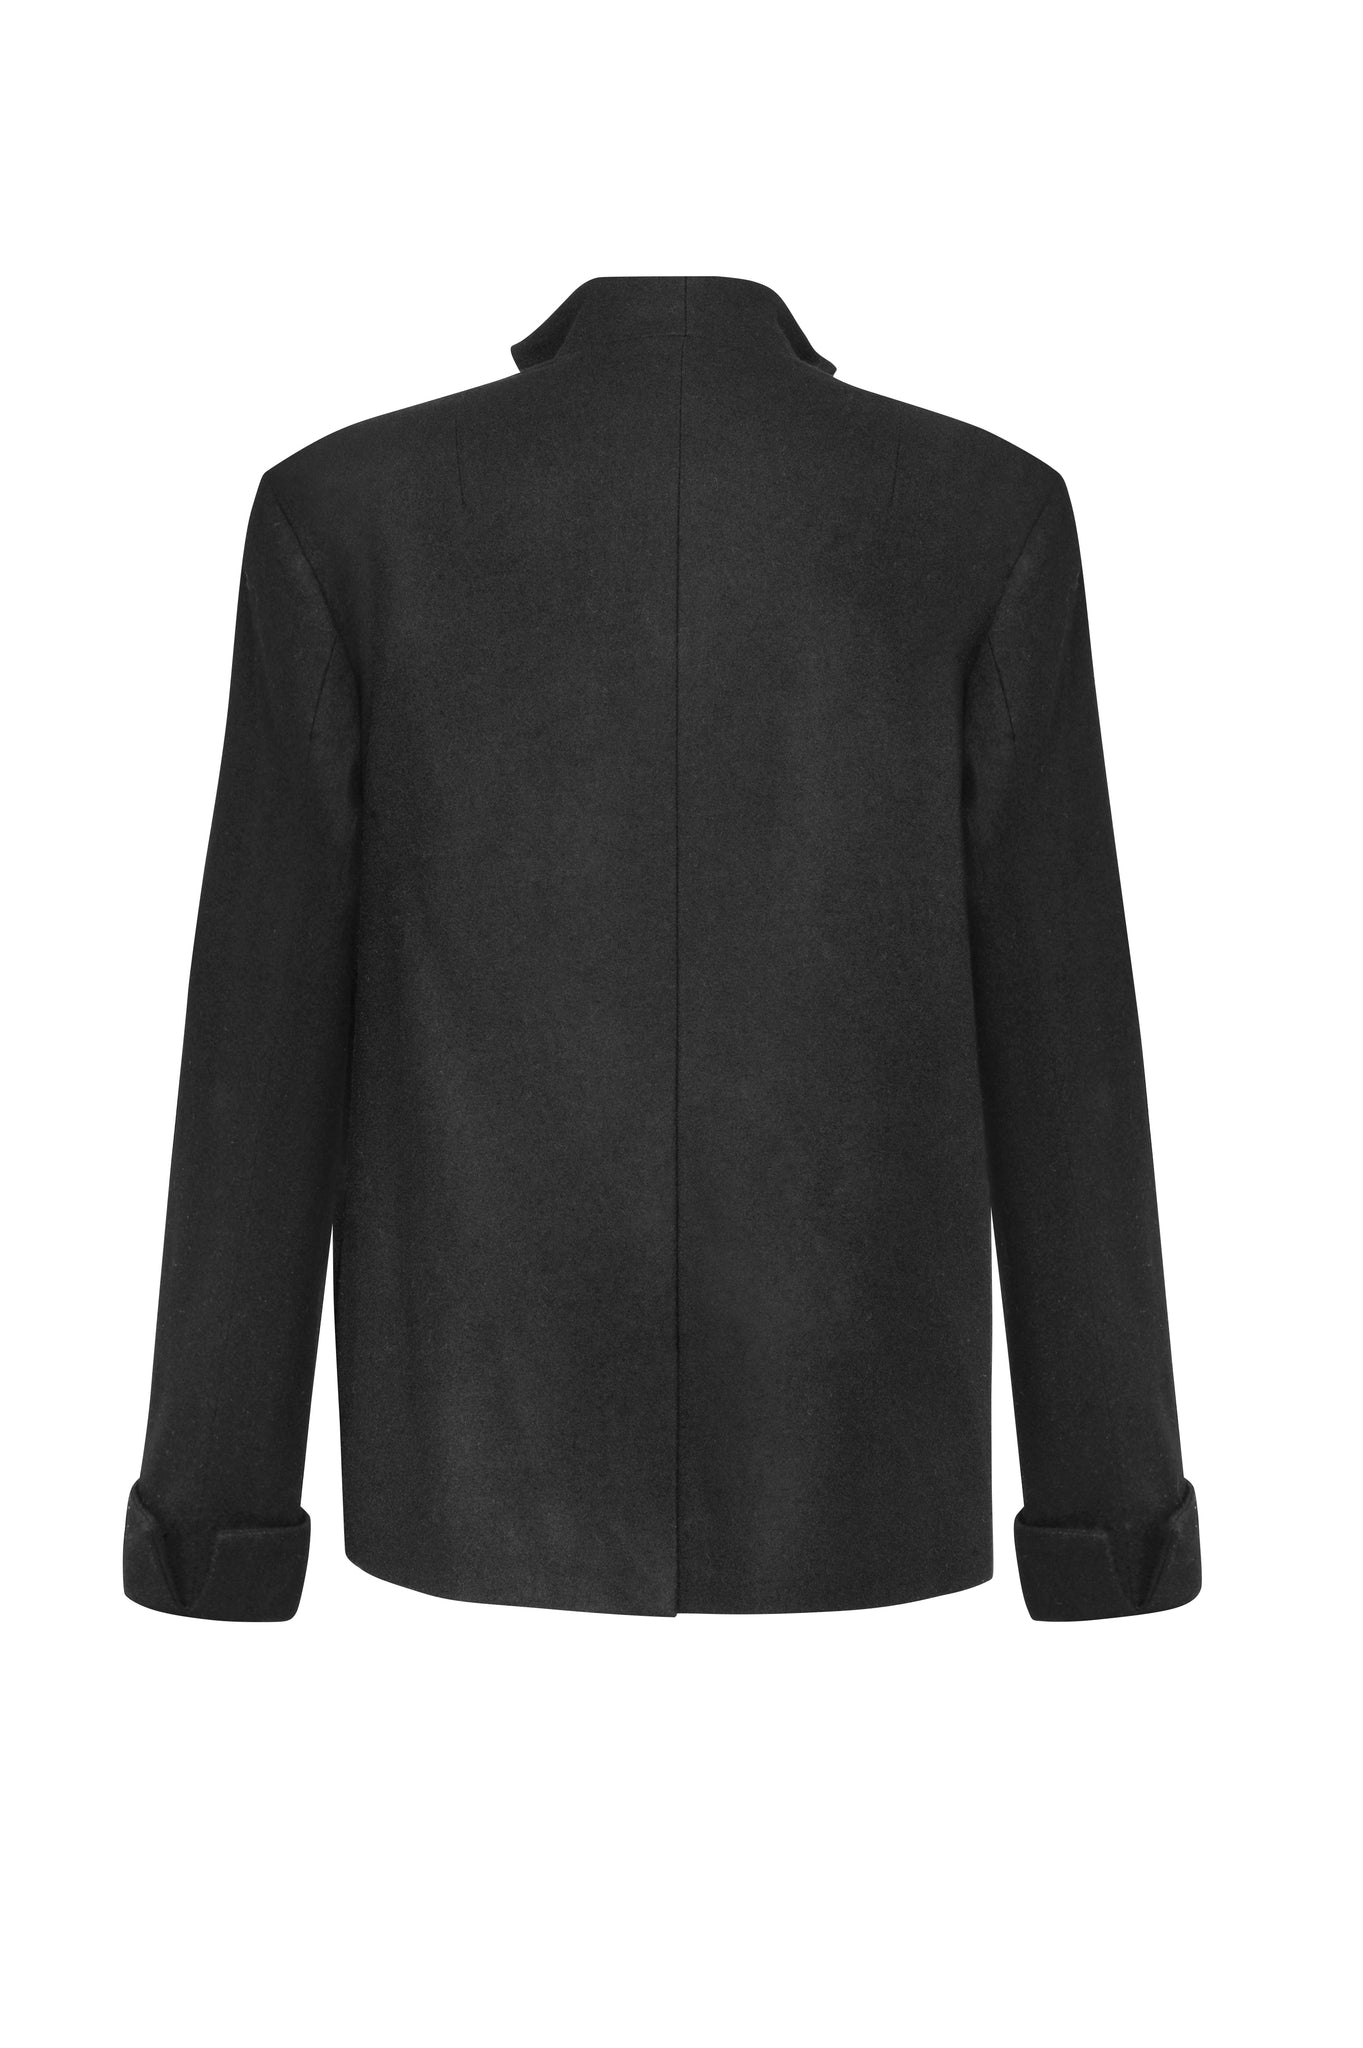 organic wool jacket black from the back - hello'ben store